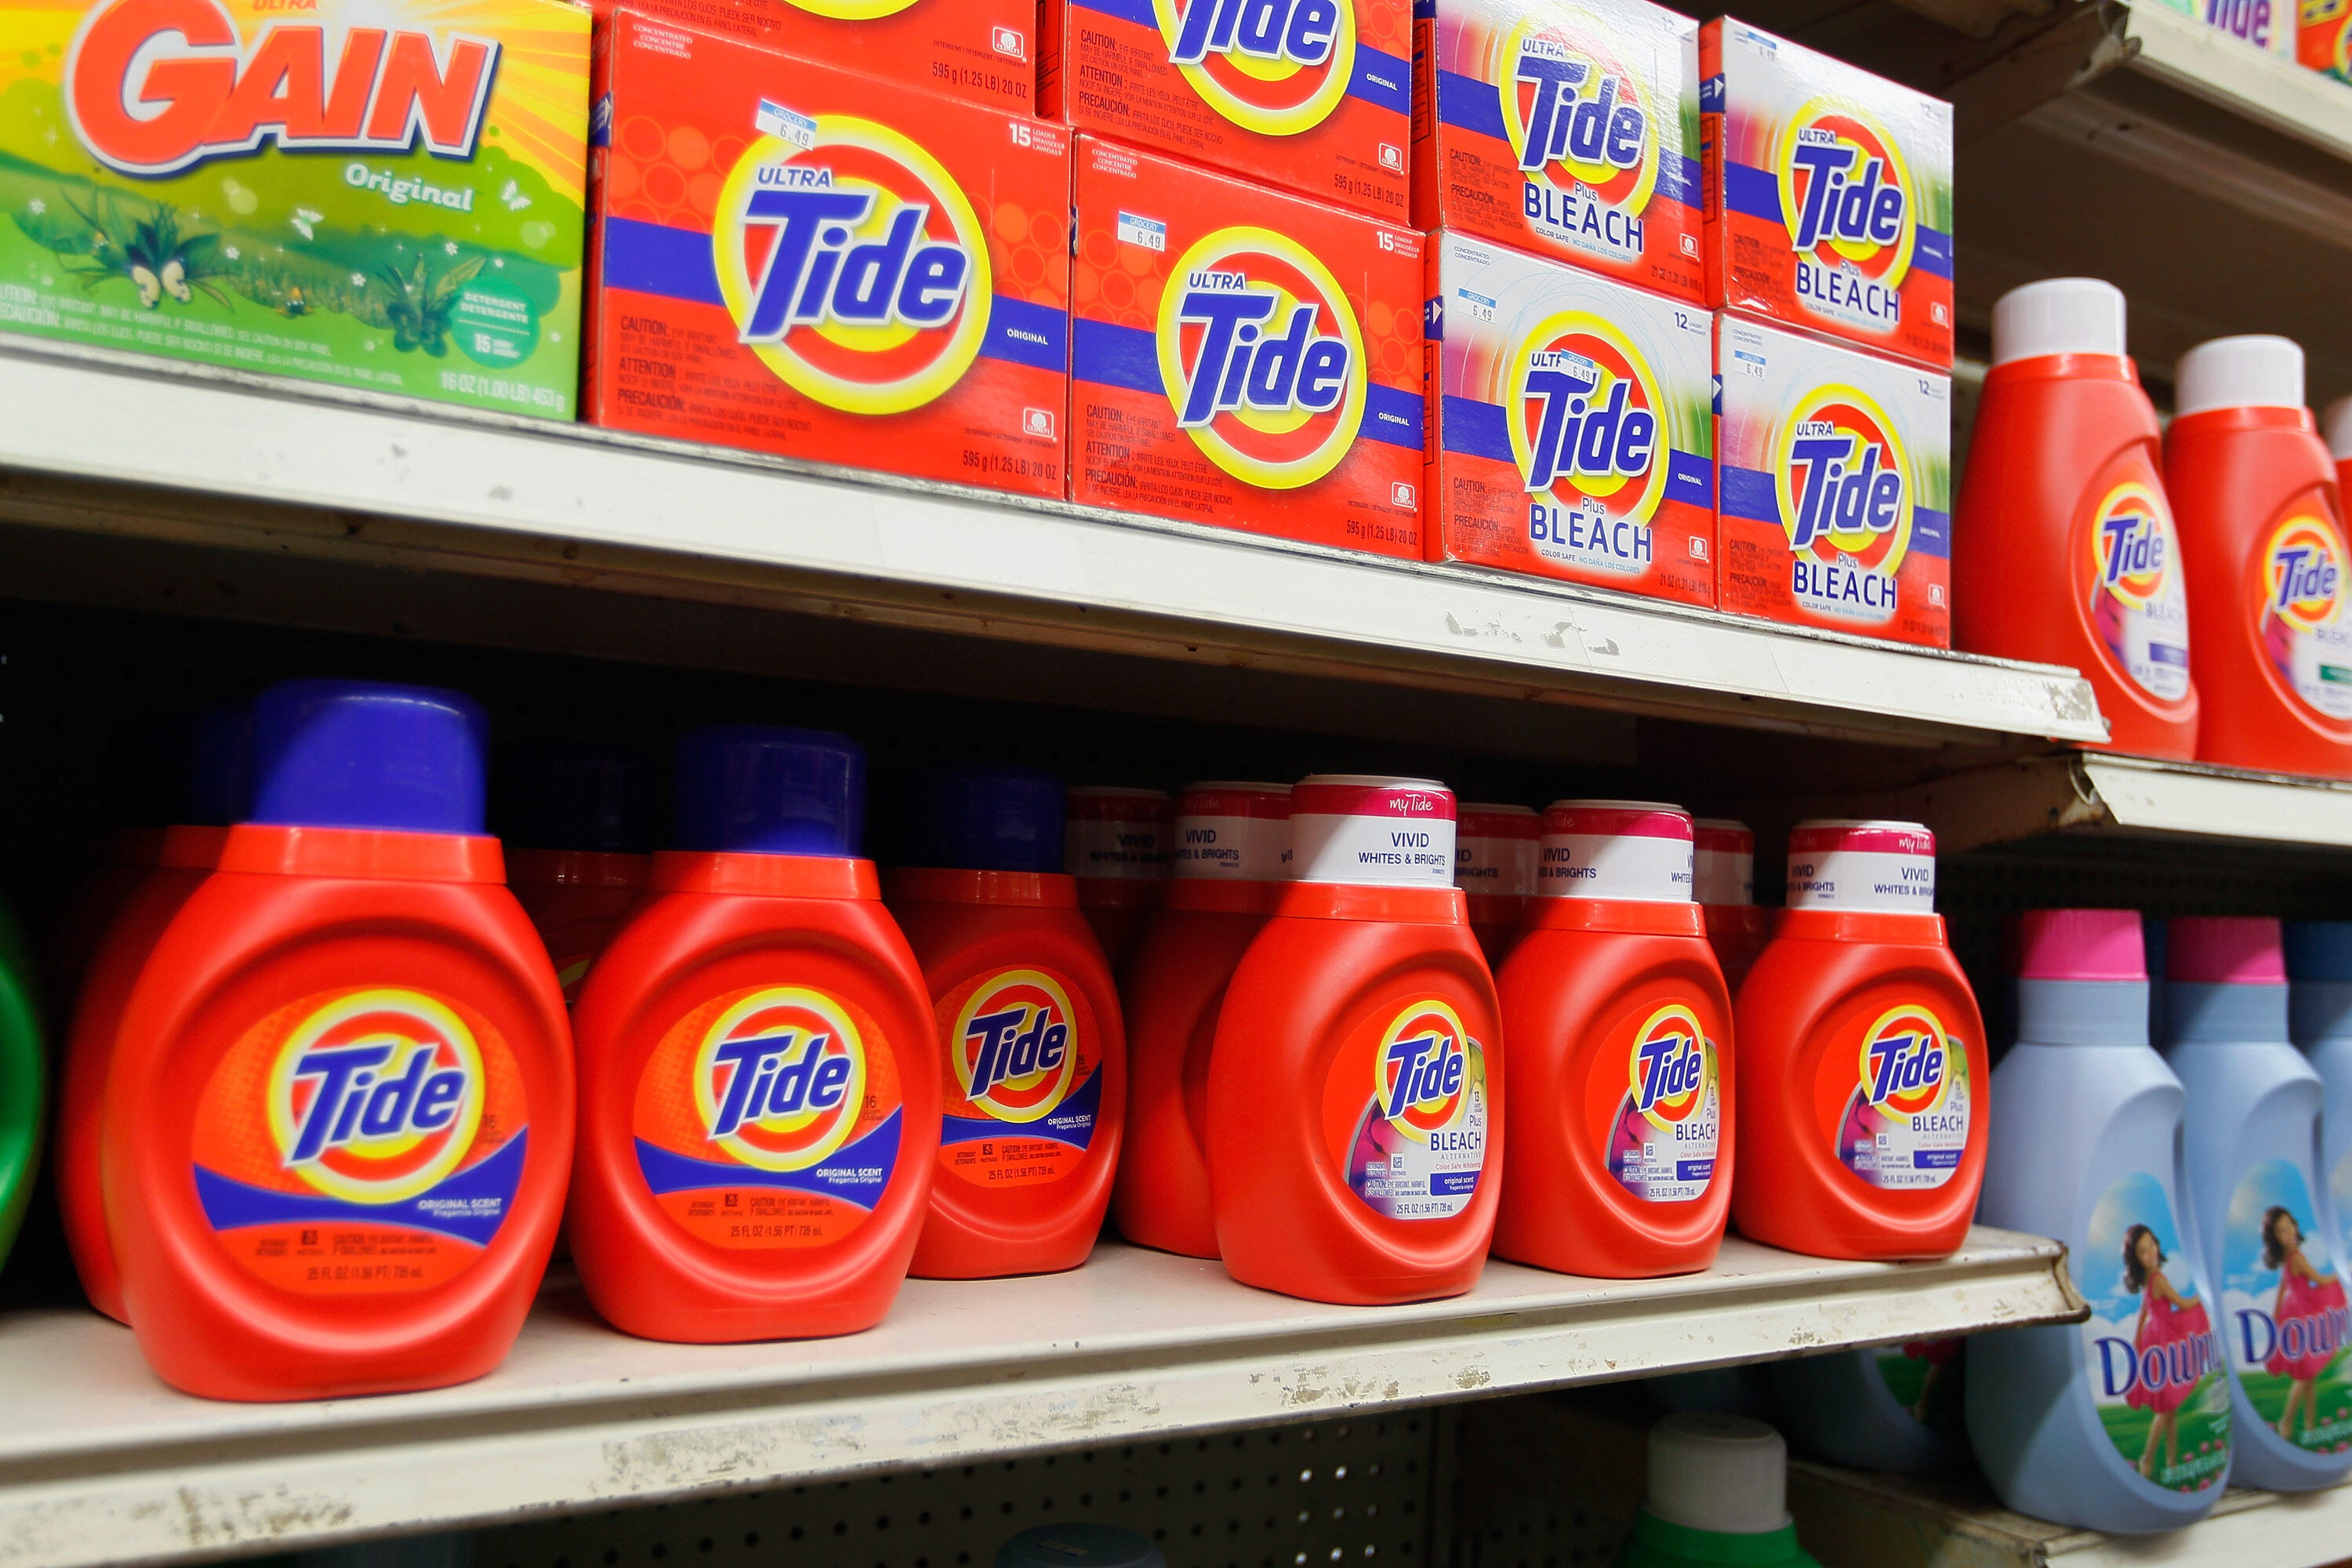 MIAMI, FL - MARCH 13:  Tide laundry detergent is seen on a store shelf on March 13, 2012 in Miami, Florida. It was recently reported that the theft and black market re-sale of Tide laundry detergent is presumably on the rise however even though law enforc